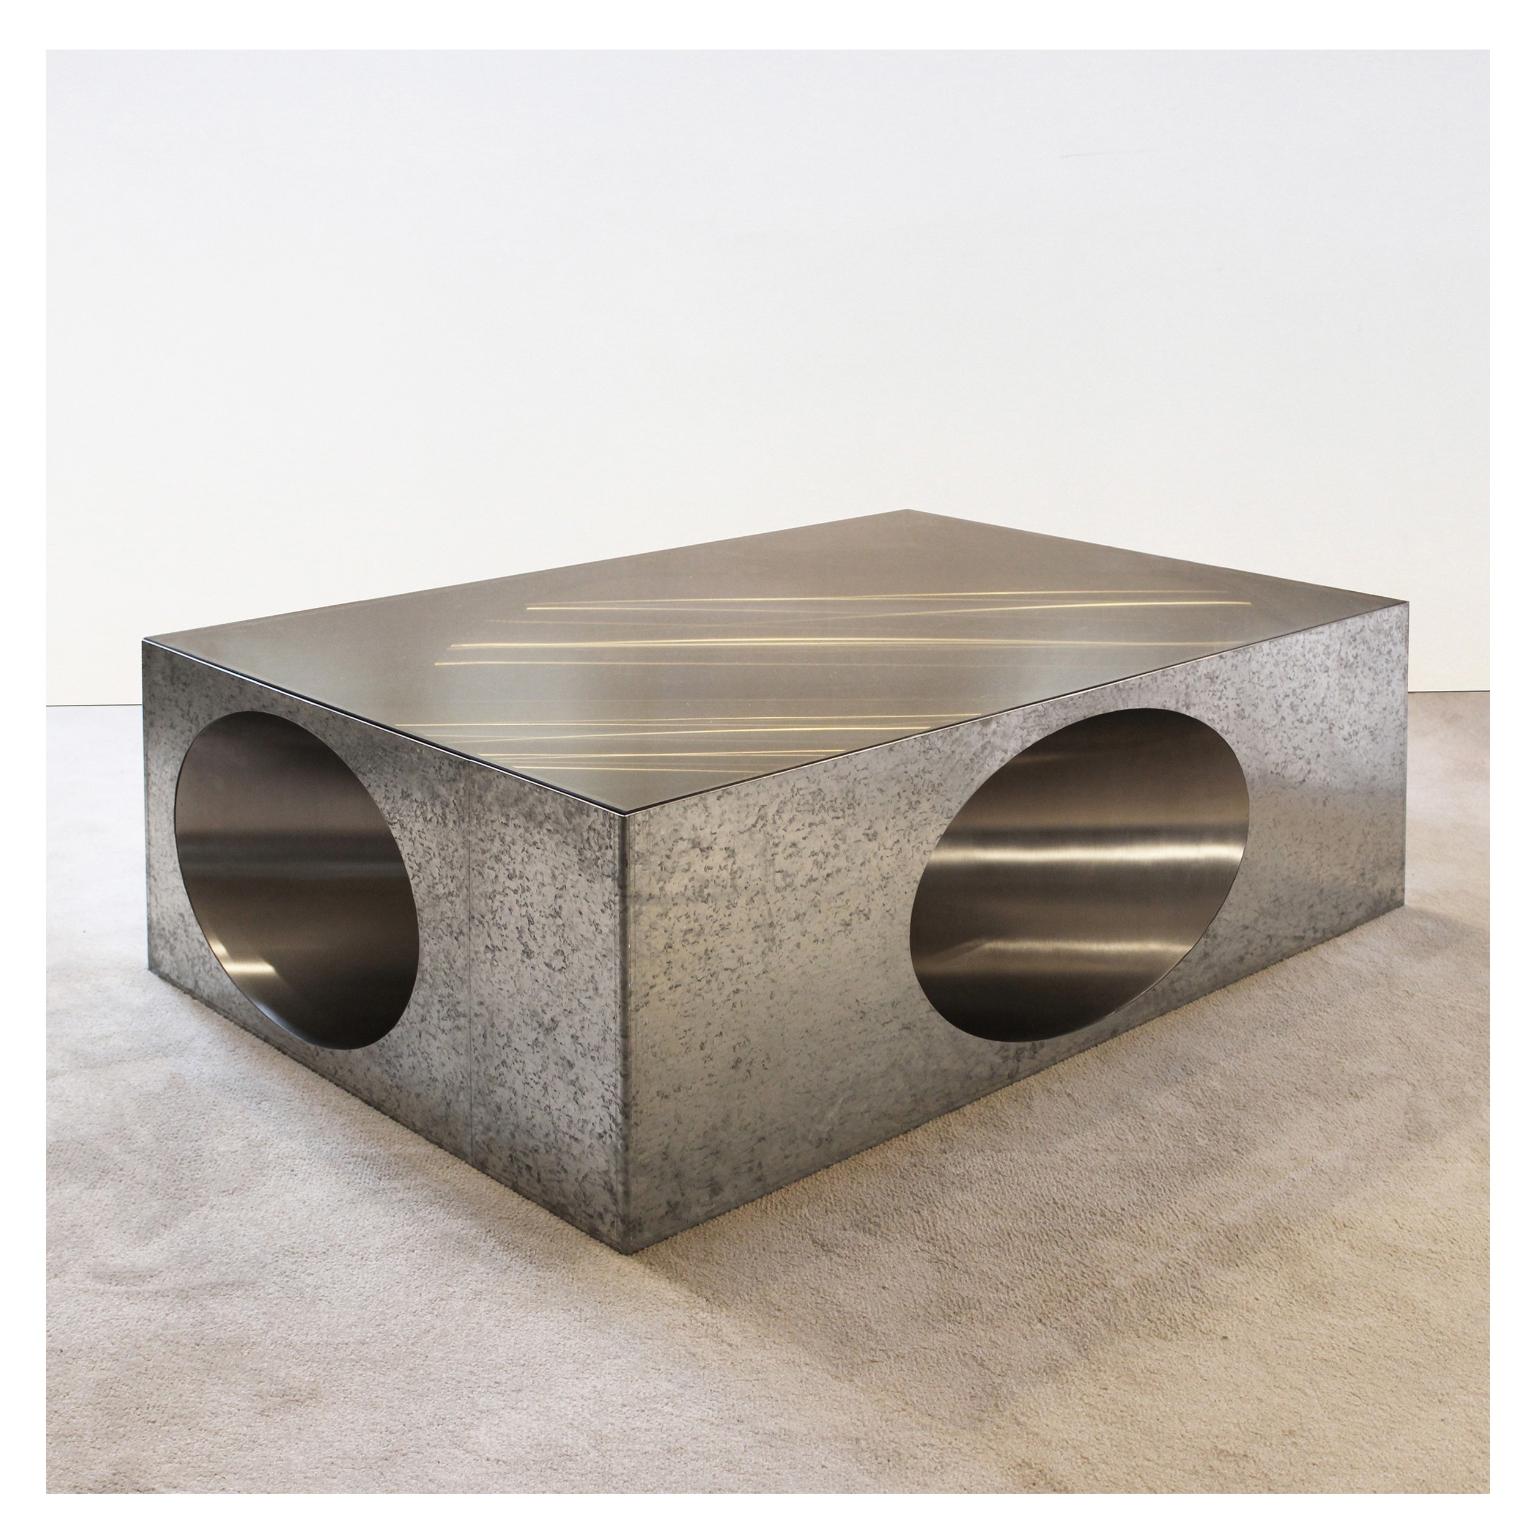 Modern Hol-Low Table by Christian Zahr